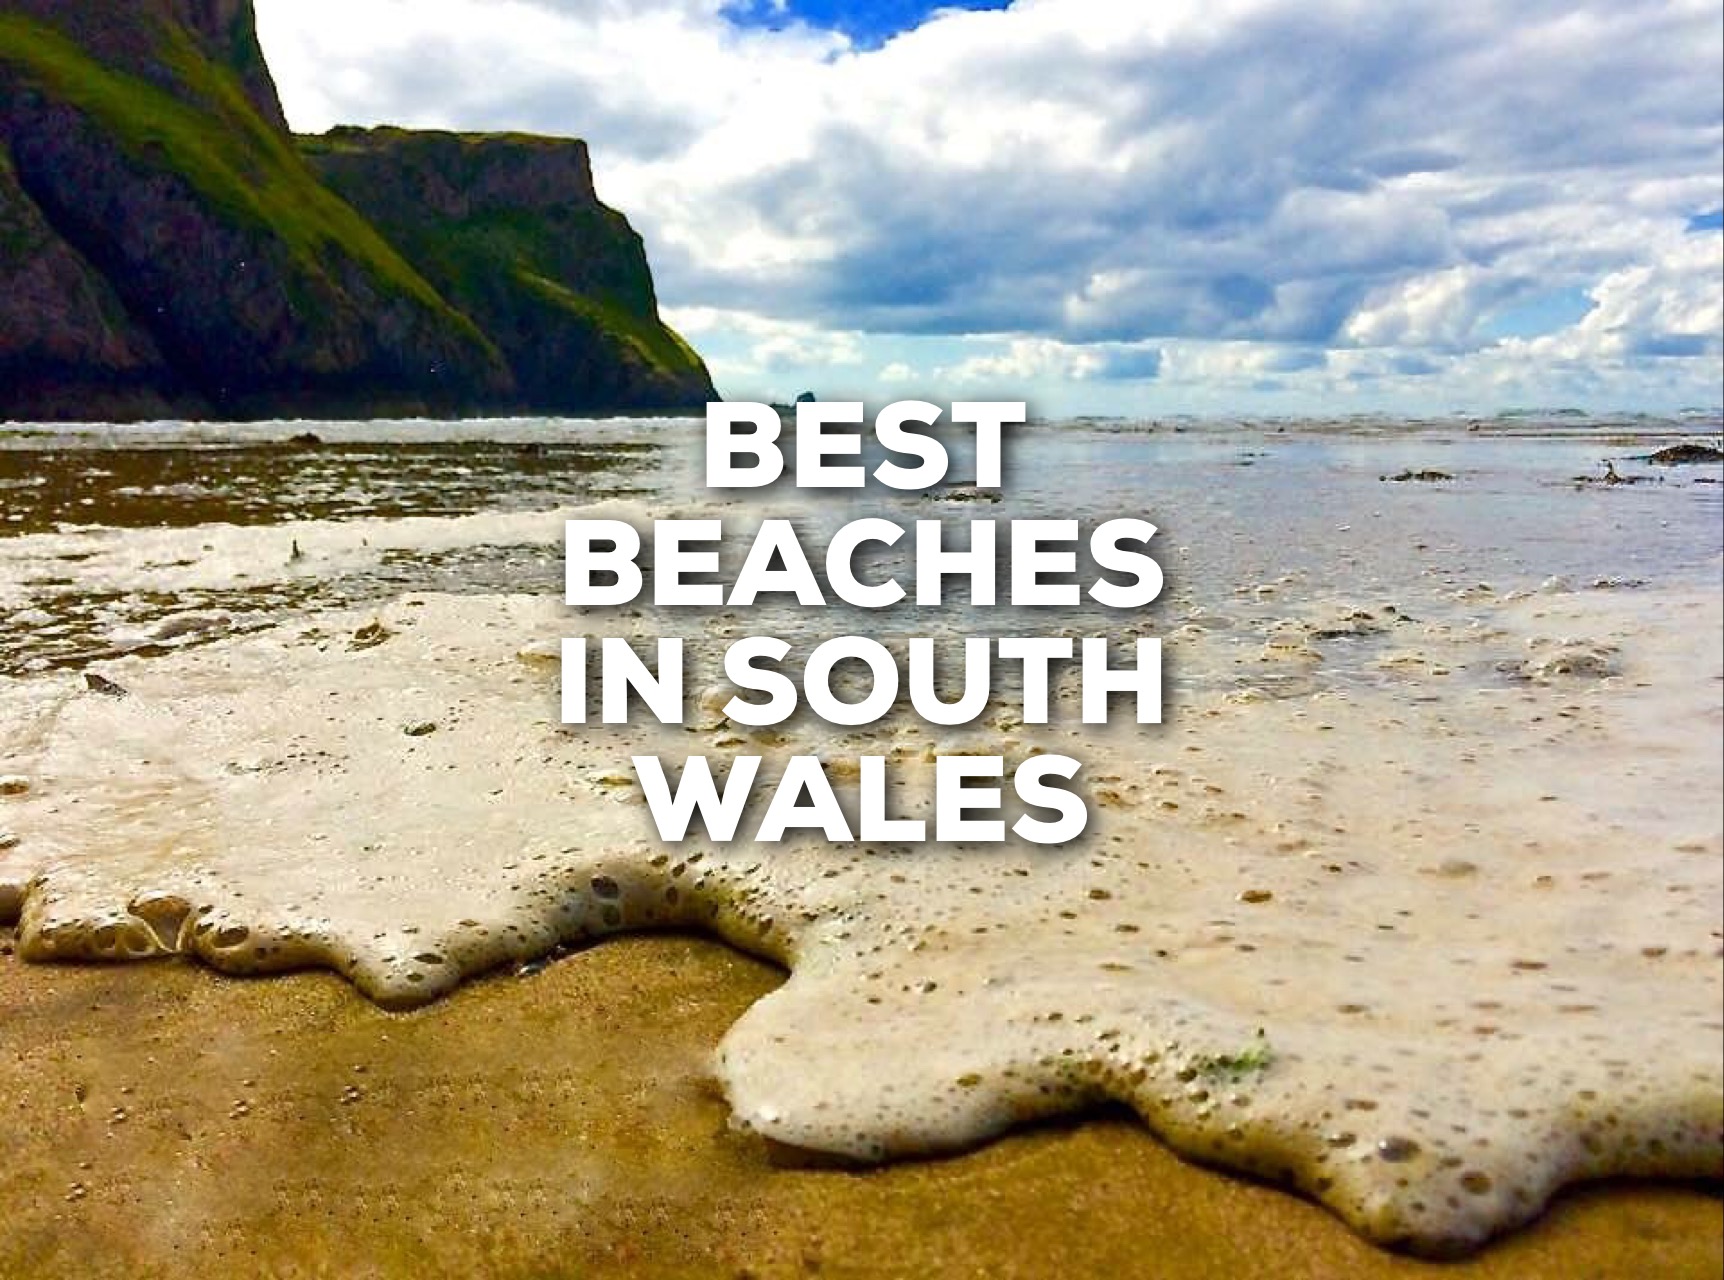 The Best Beaches In South Wales – Tried & Tested